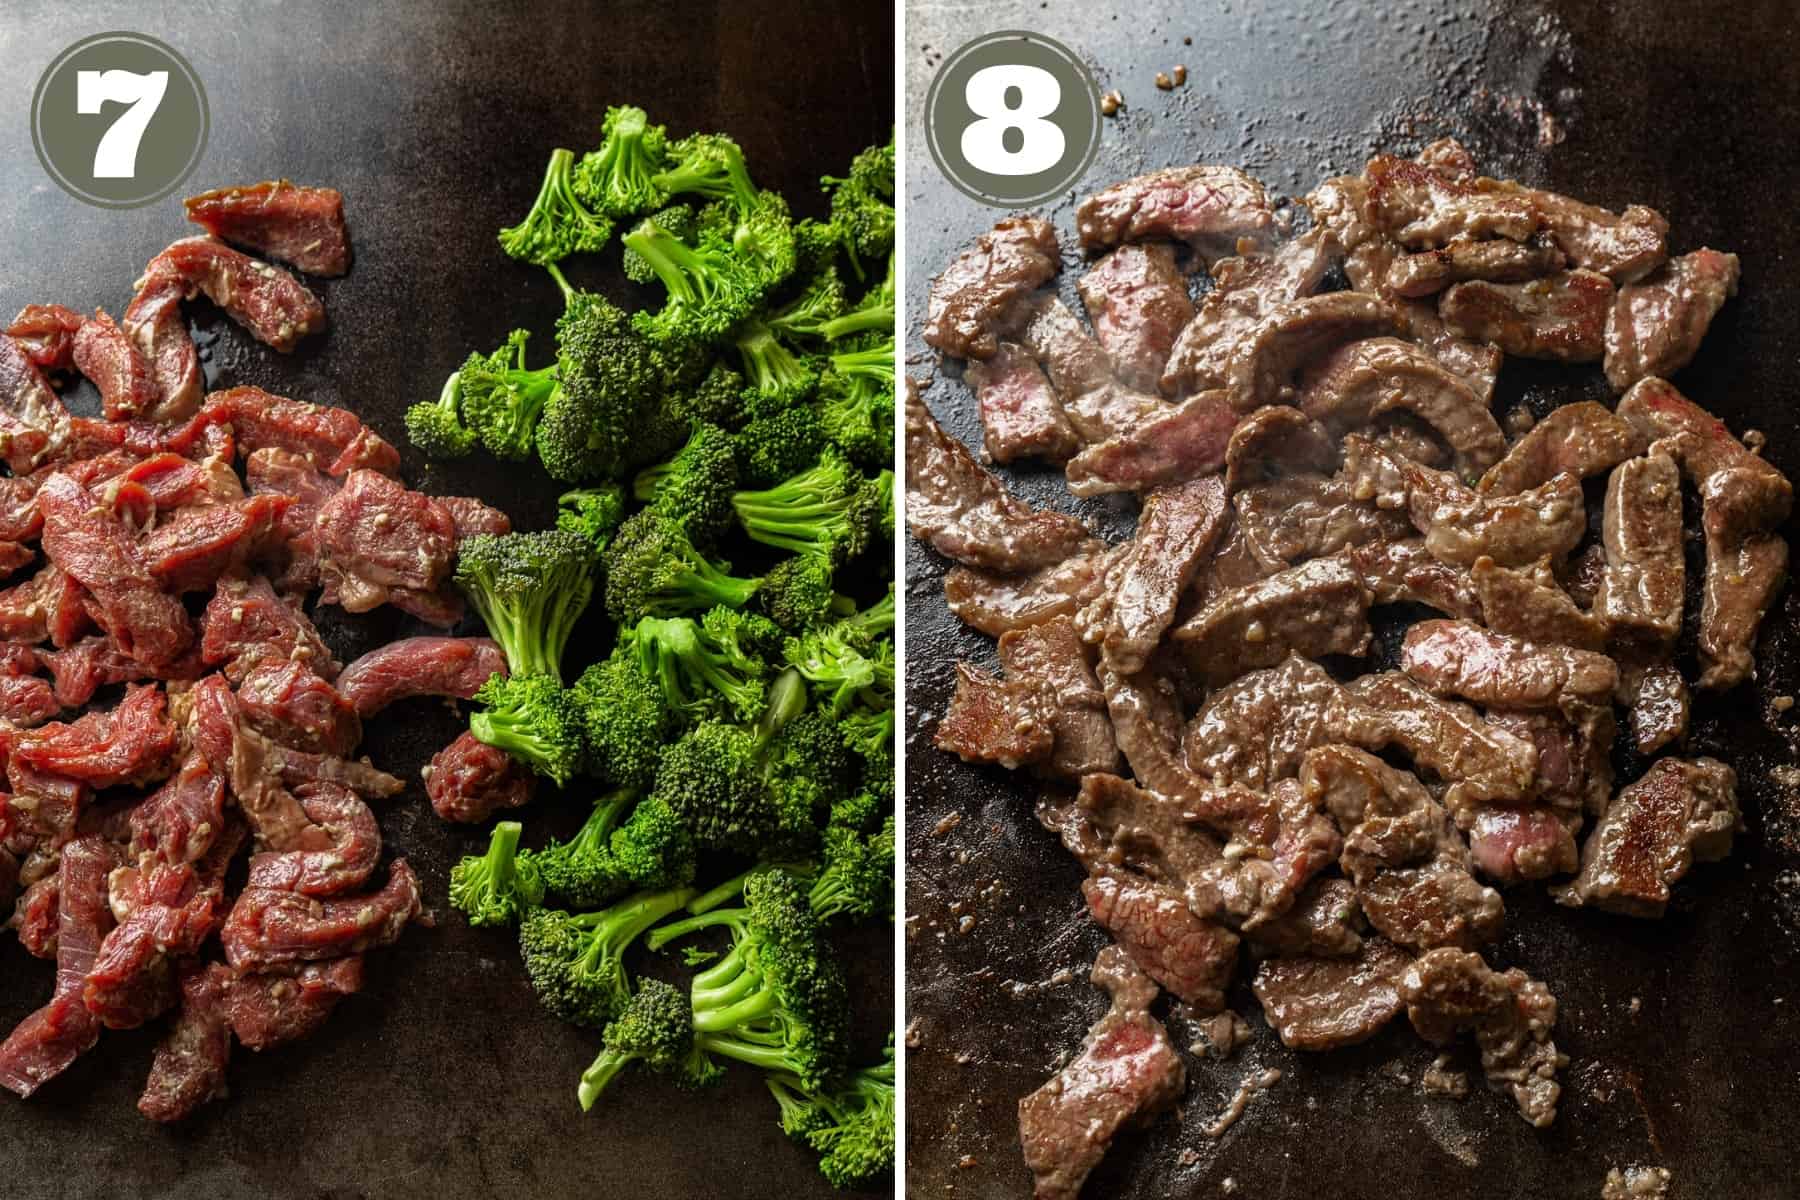 Side by side photos showing steak and broccoli cooking on a blackstone griddle.